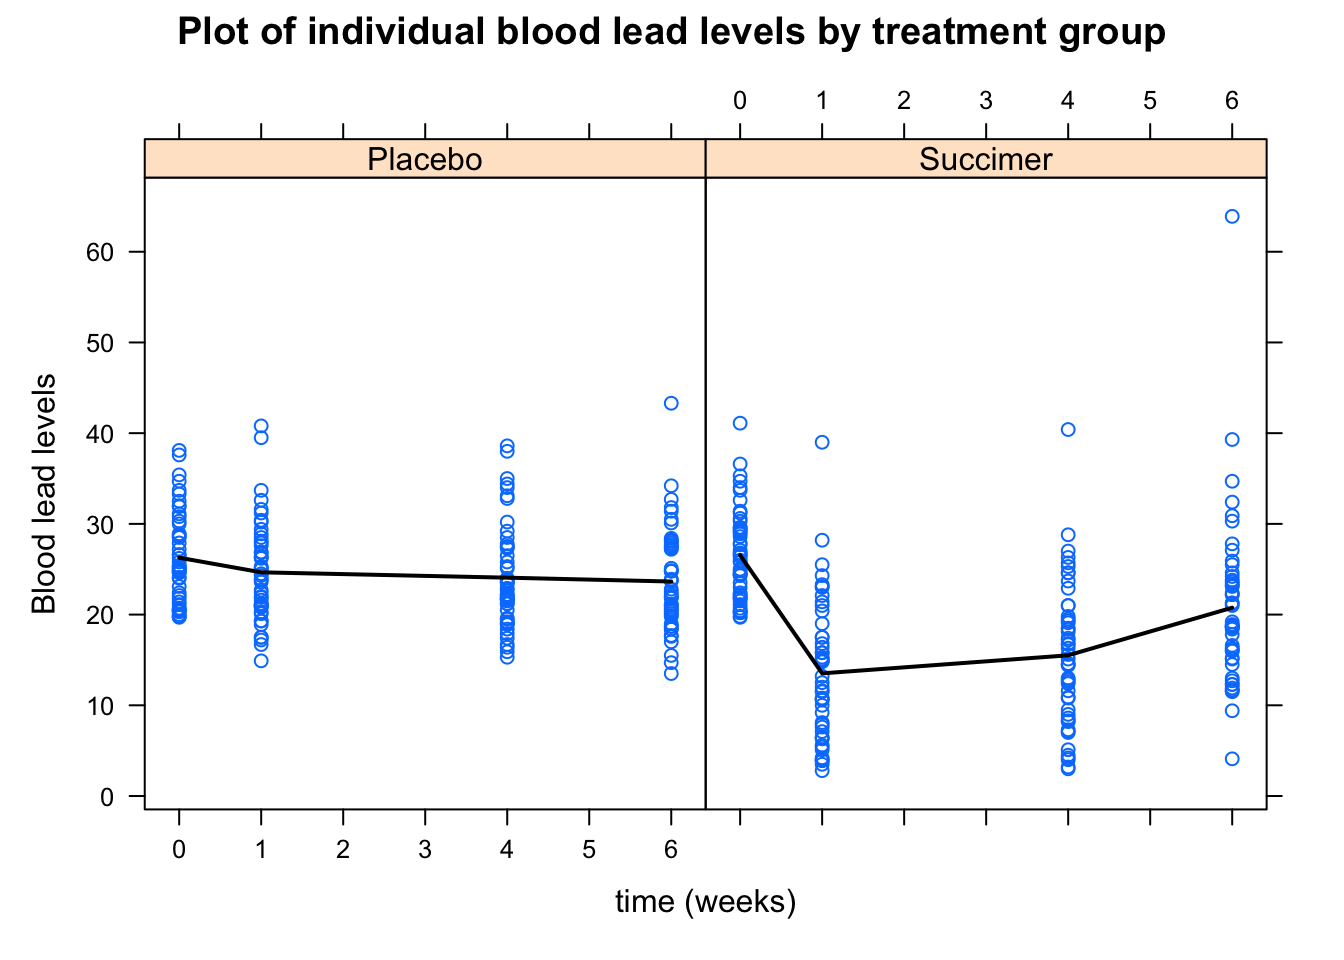 Plot of individual blood lead levels stratified by treatment group. Dark line represents mean blood level at each observation times.